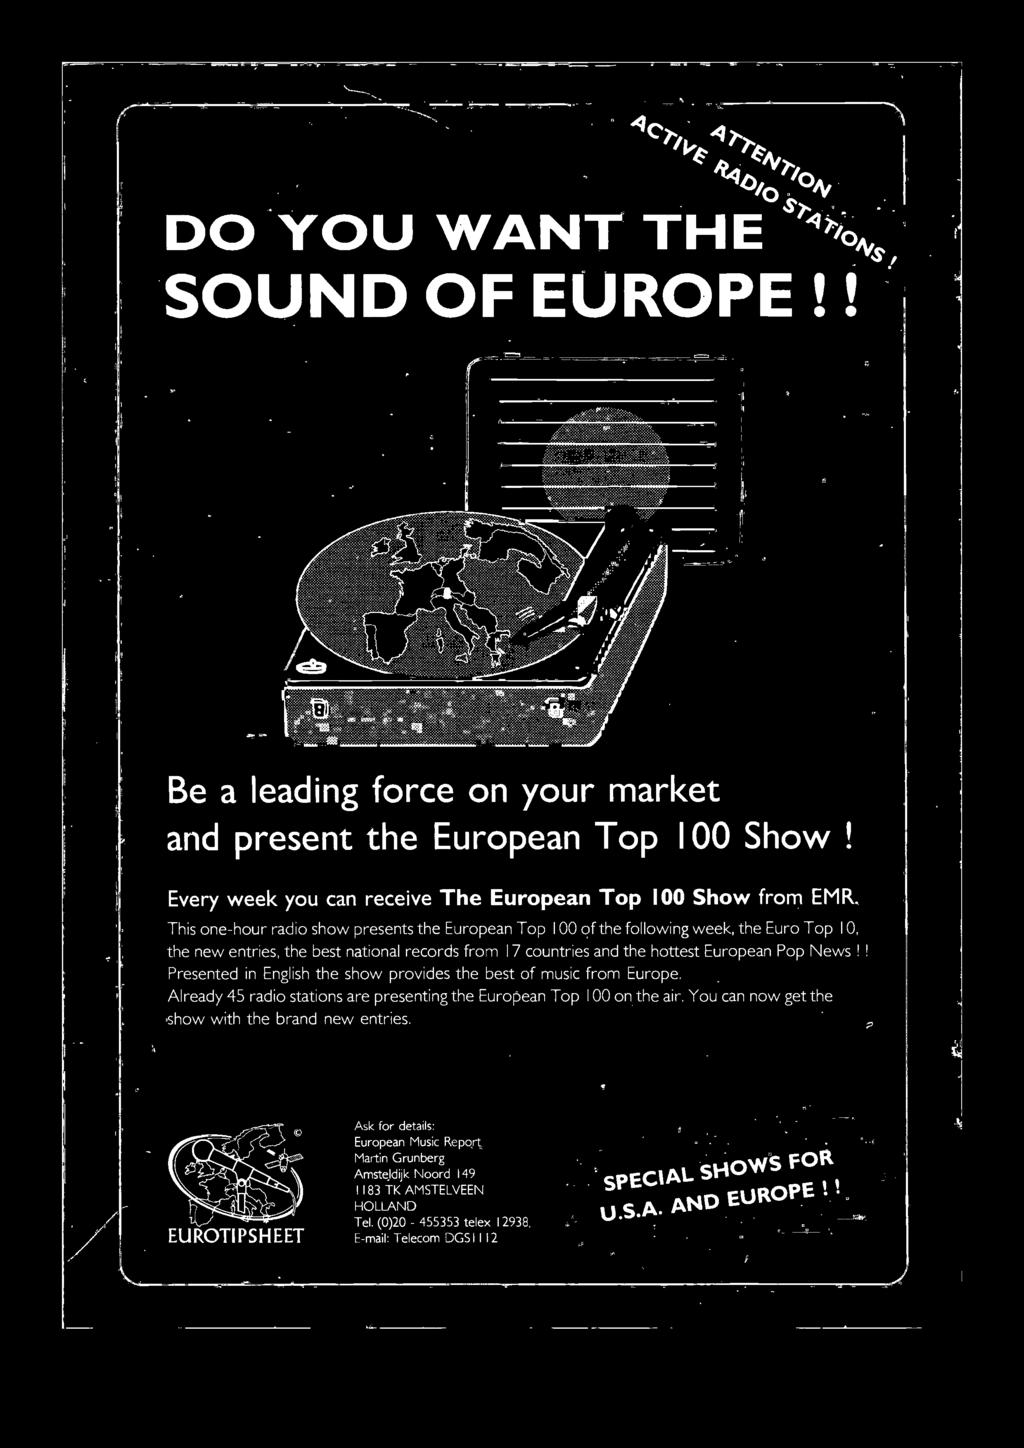 ! Presented in English the show provides the best of music from Europe.